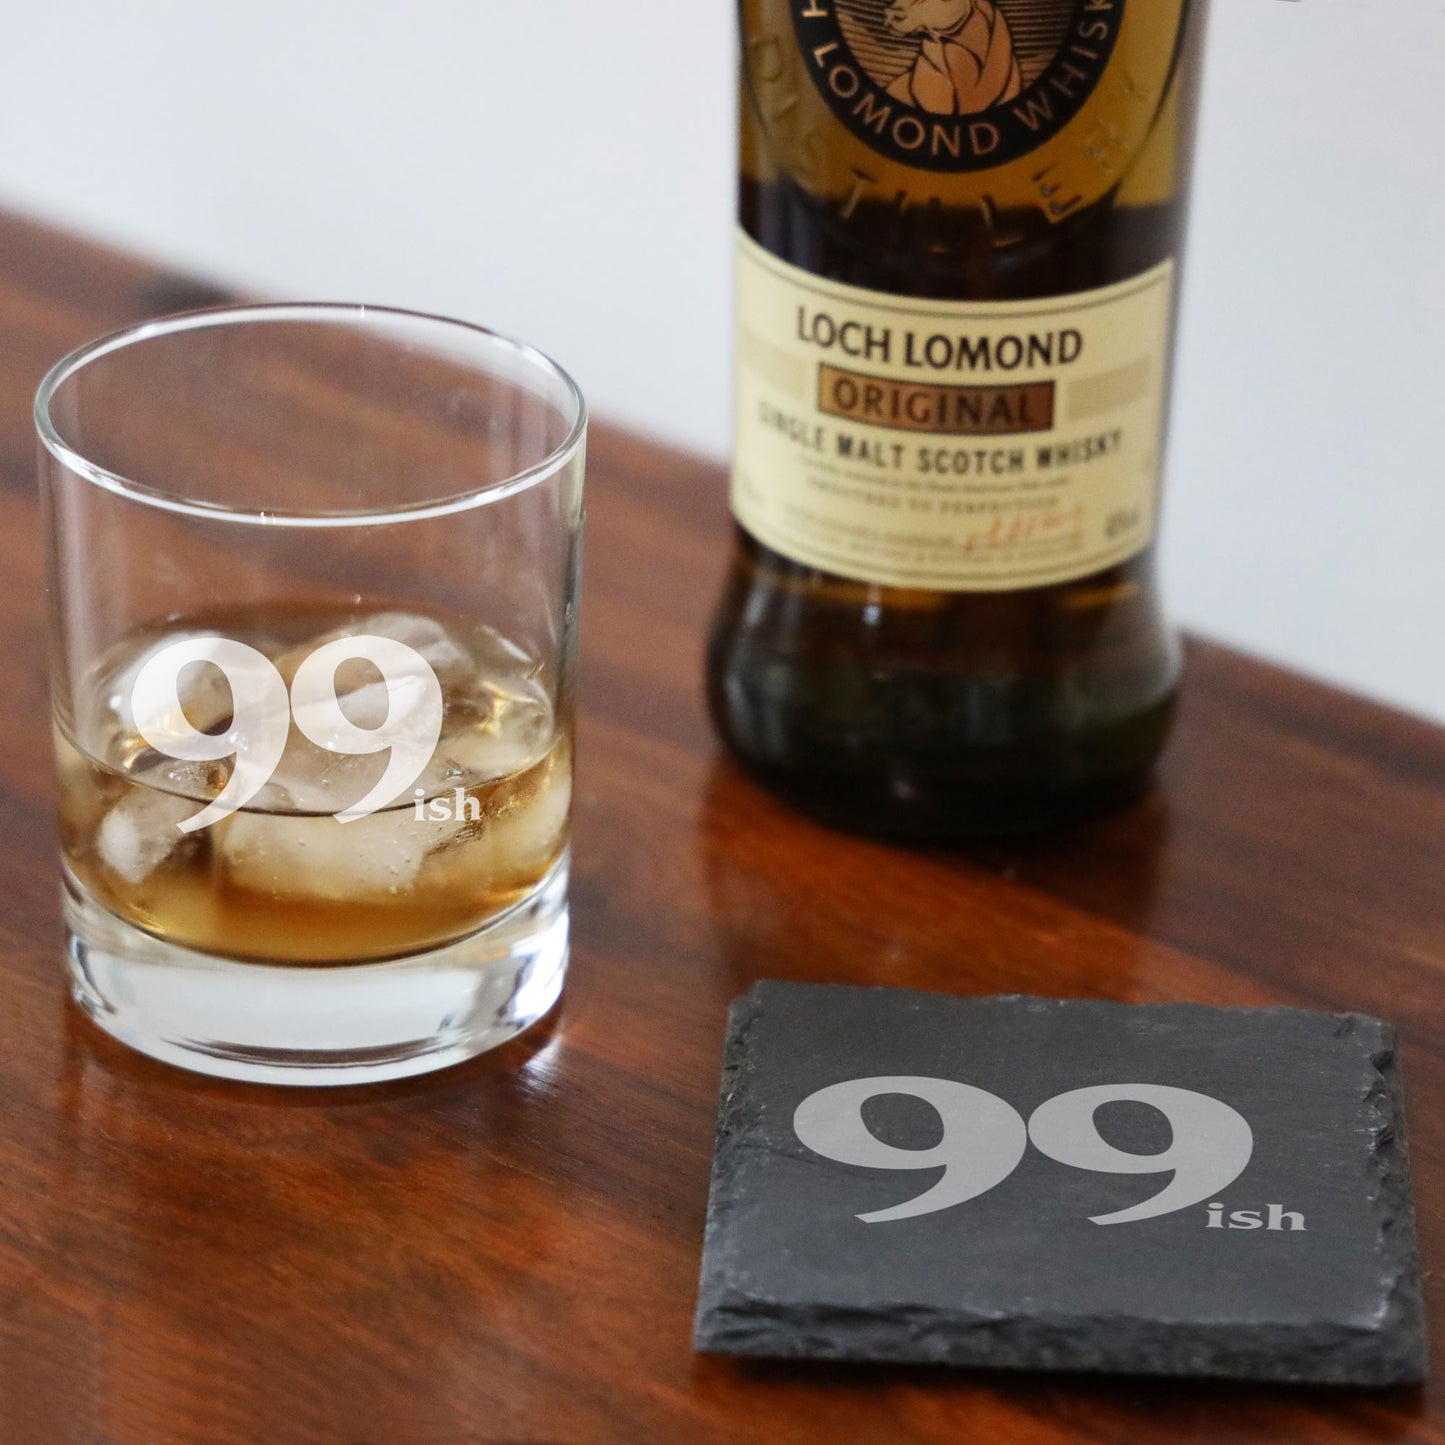 99ish Whisky Glass and/or Coaster Set  - Always Looking Good - Glass & Square Coaster Set  